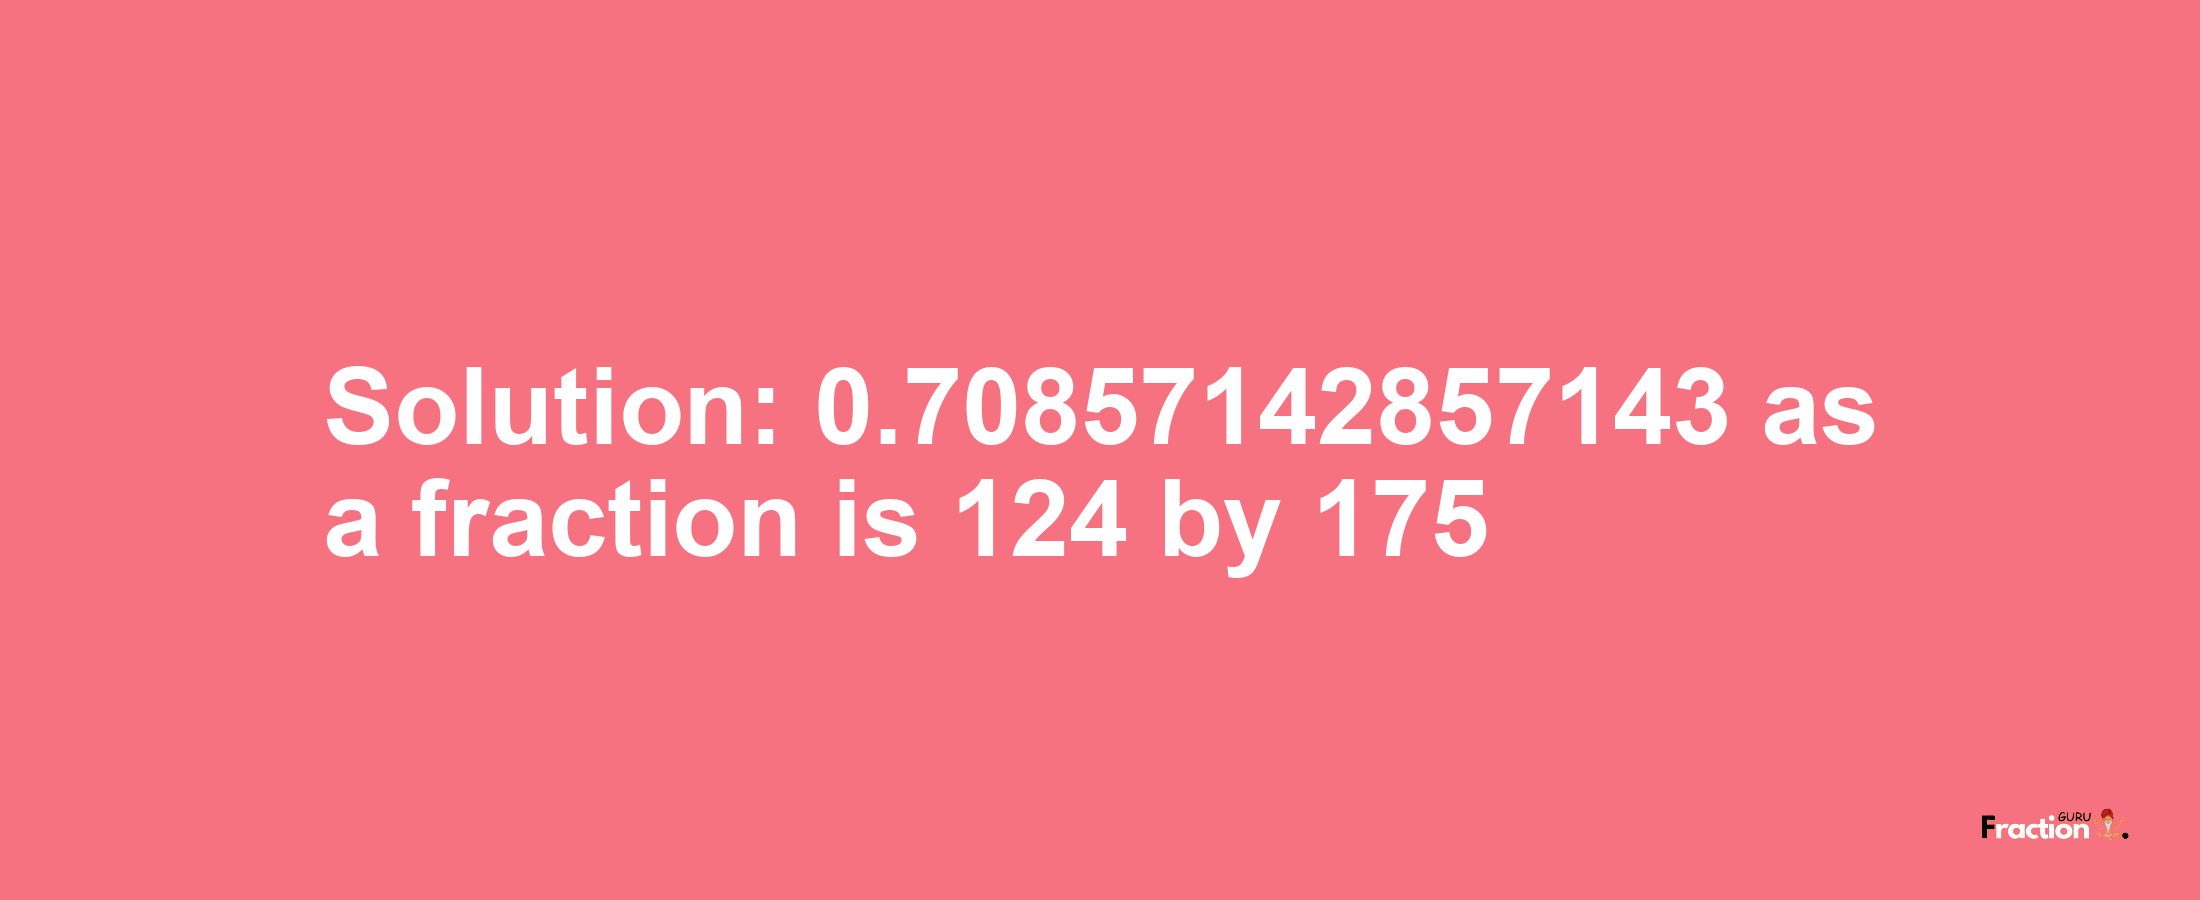 Solution:0.70857142857143 as a fraction is 124/175